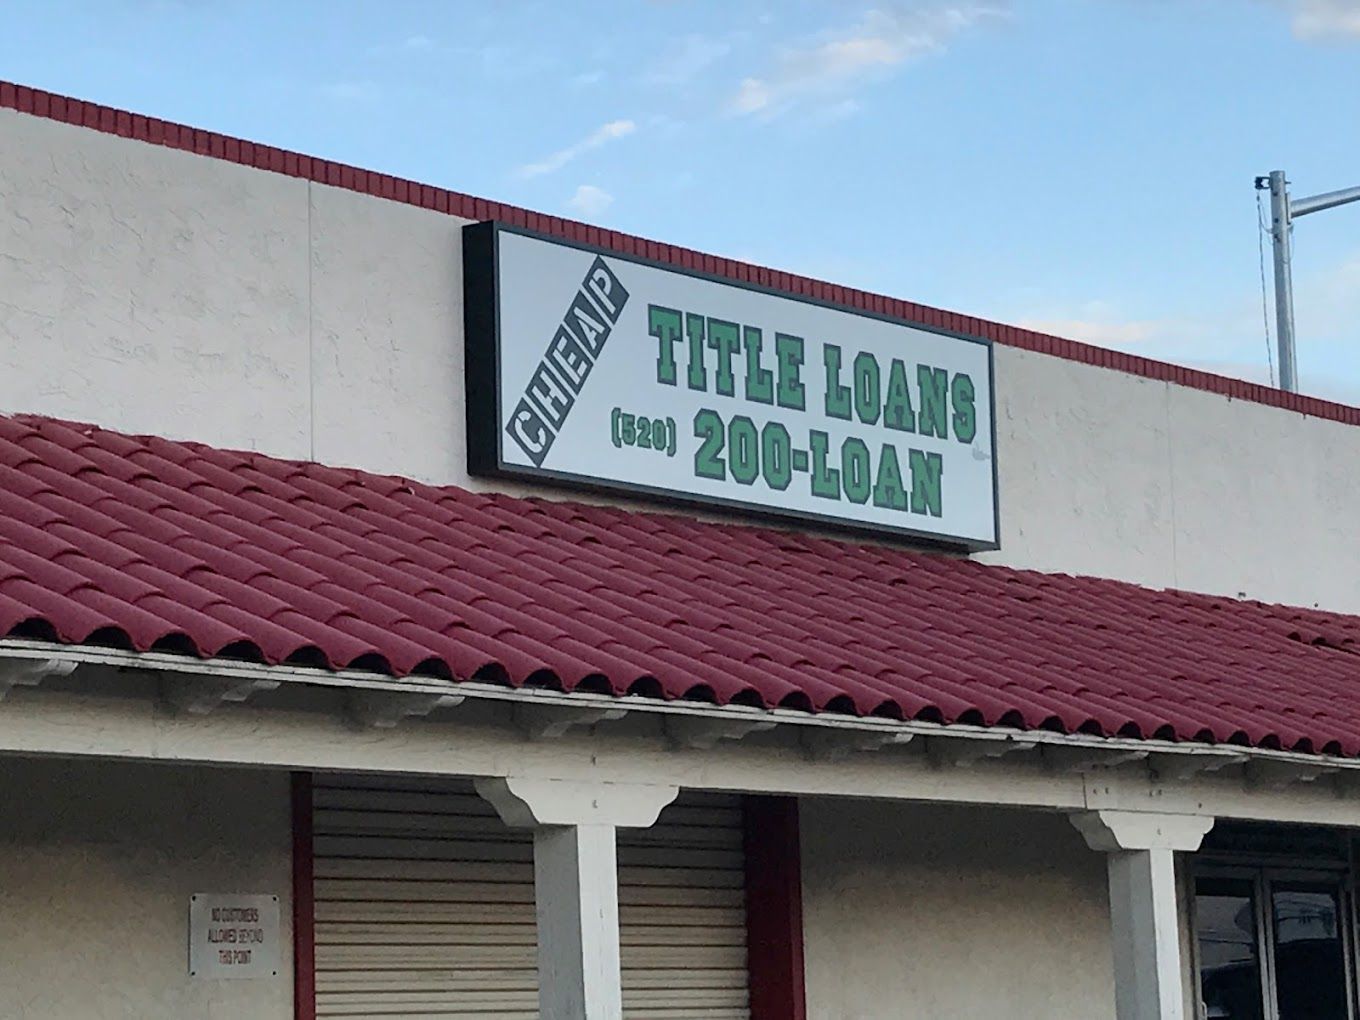 How much money can you get for a title loan in Tucson, AZ